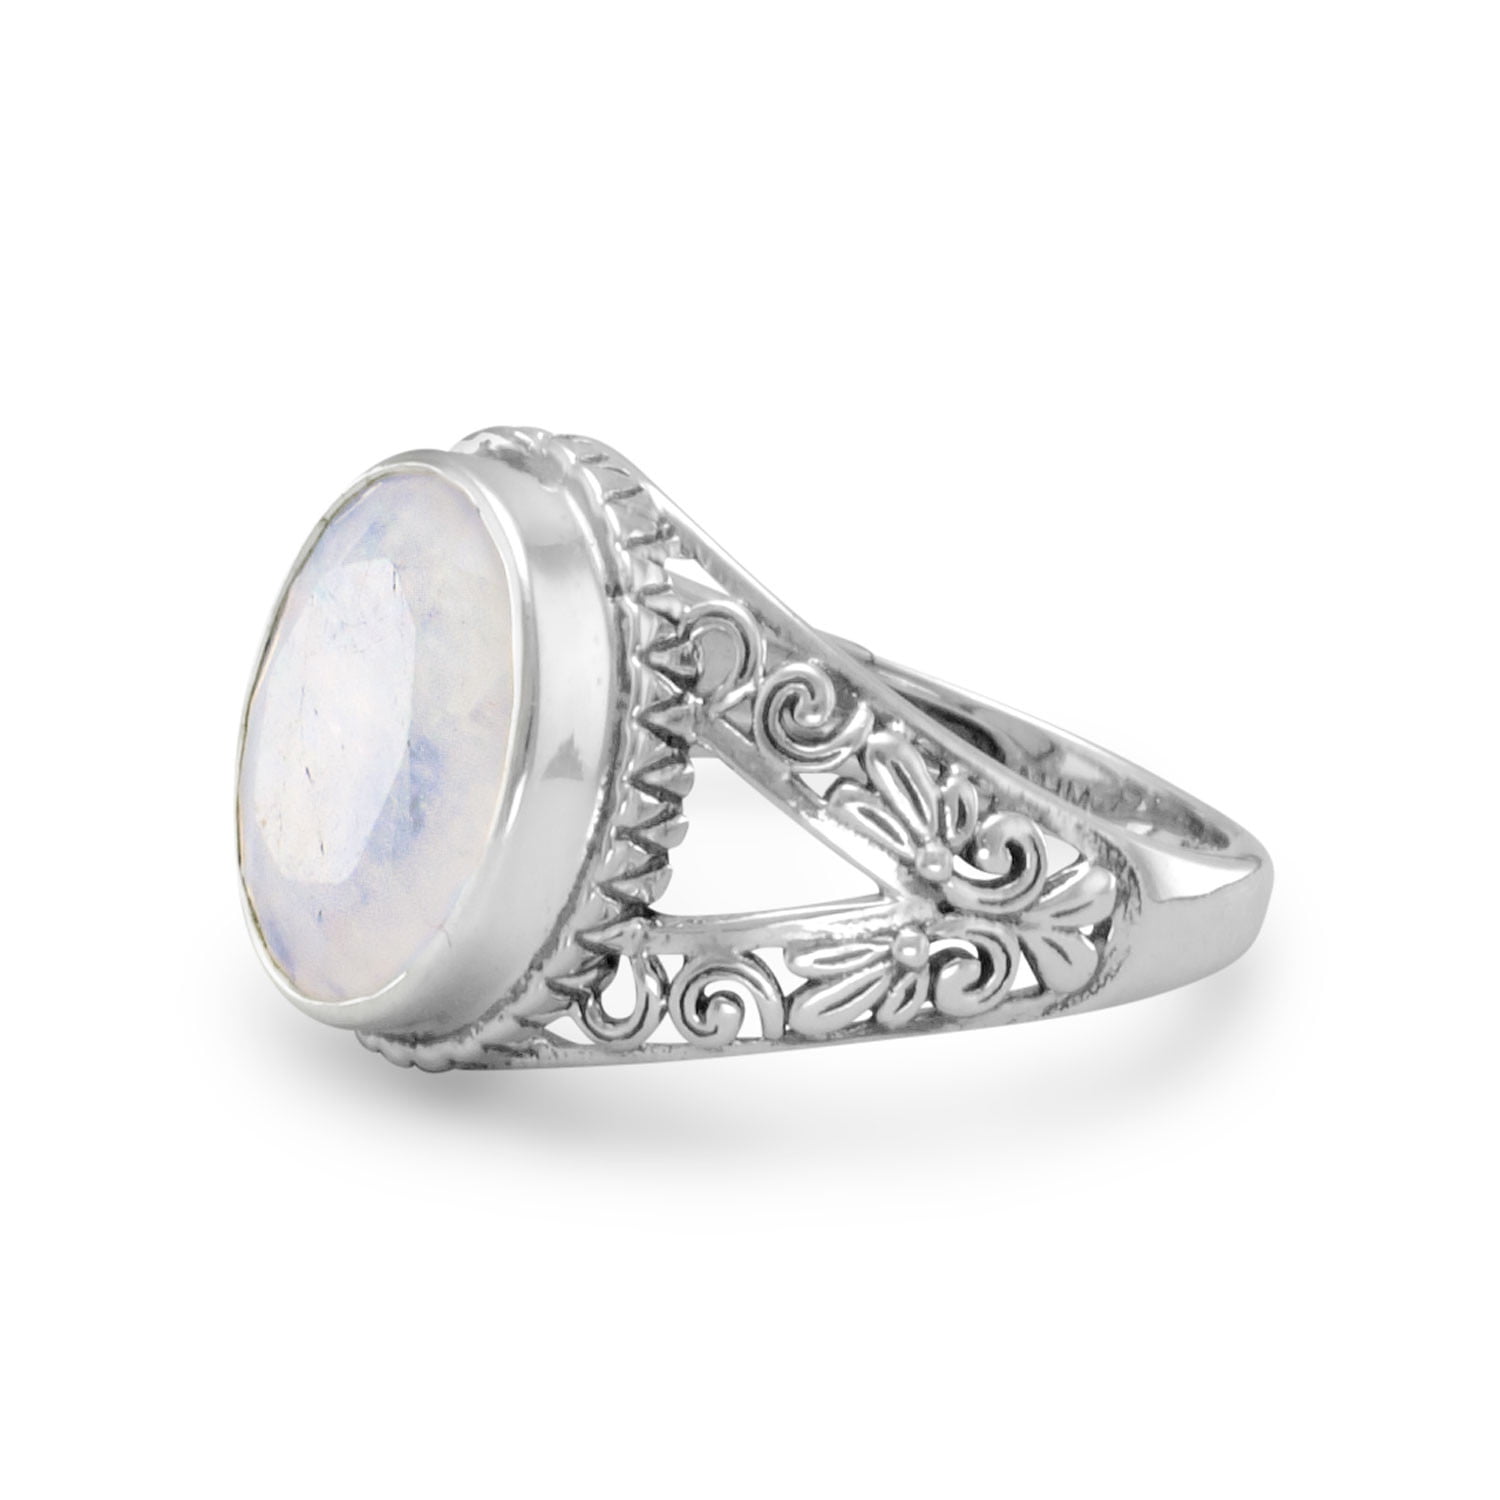 Faceted Rainbow Moonstone Ring Gypsy Ring Boho Ring Blue Flash Ring Post Ring Birthstone Ring Handmade Ring Delicate Ring Wedding Ring Vintage Ring Handcrafted Ring 